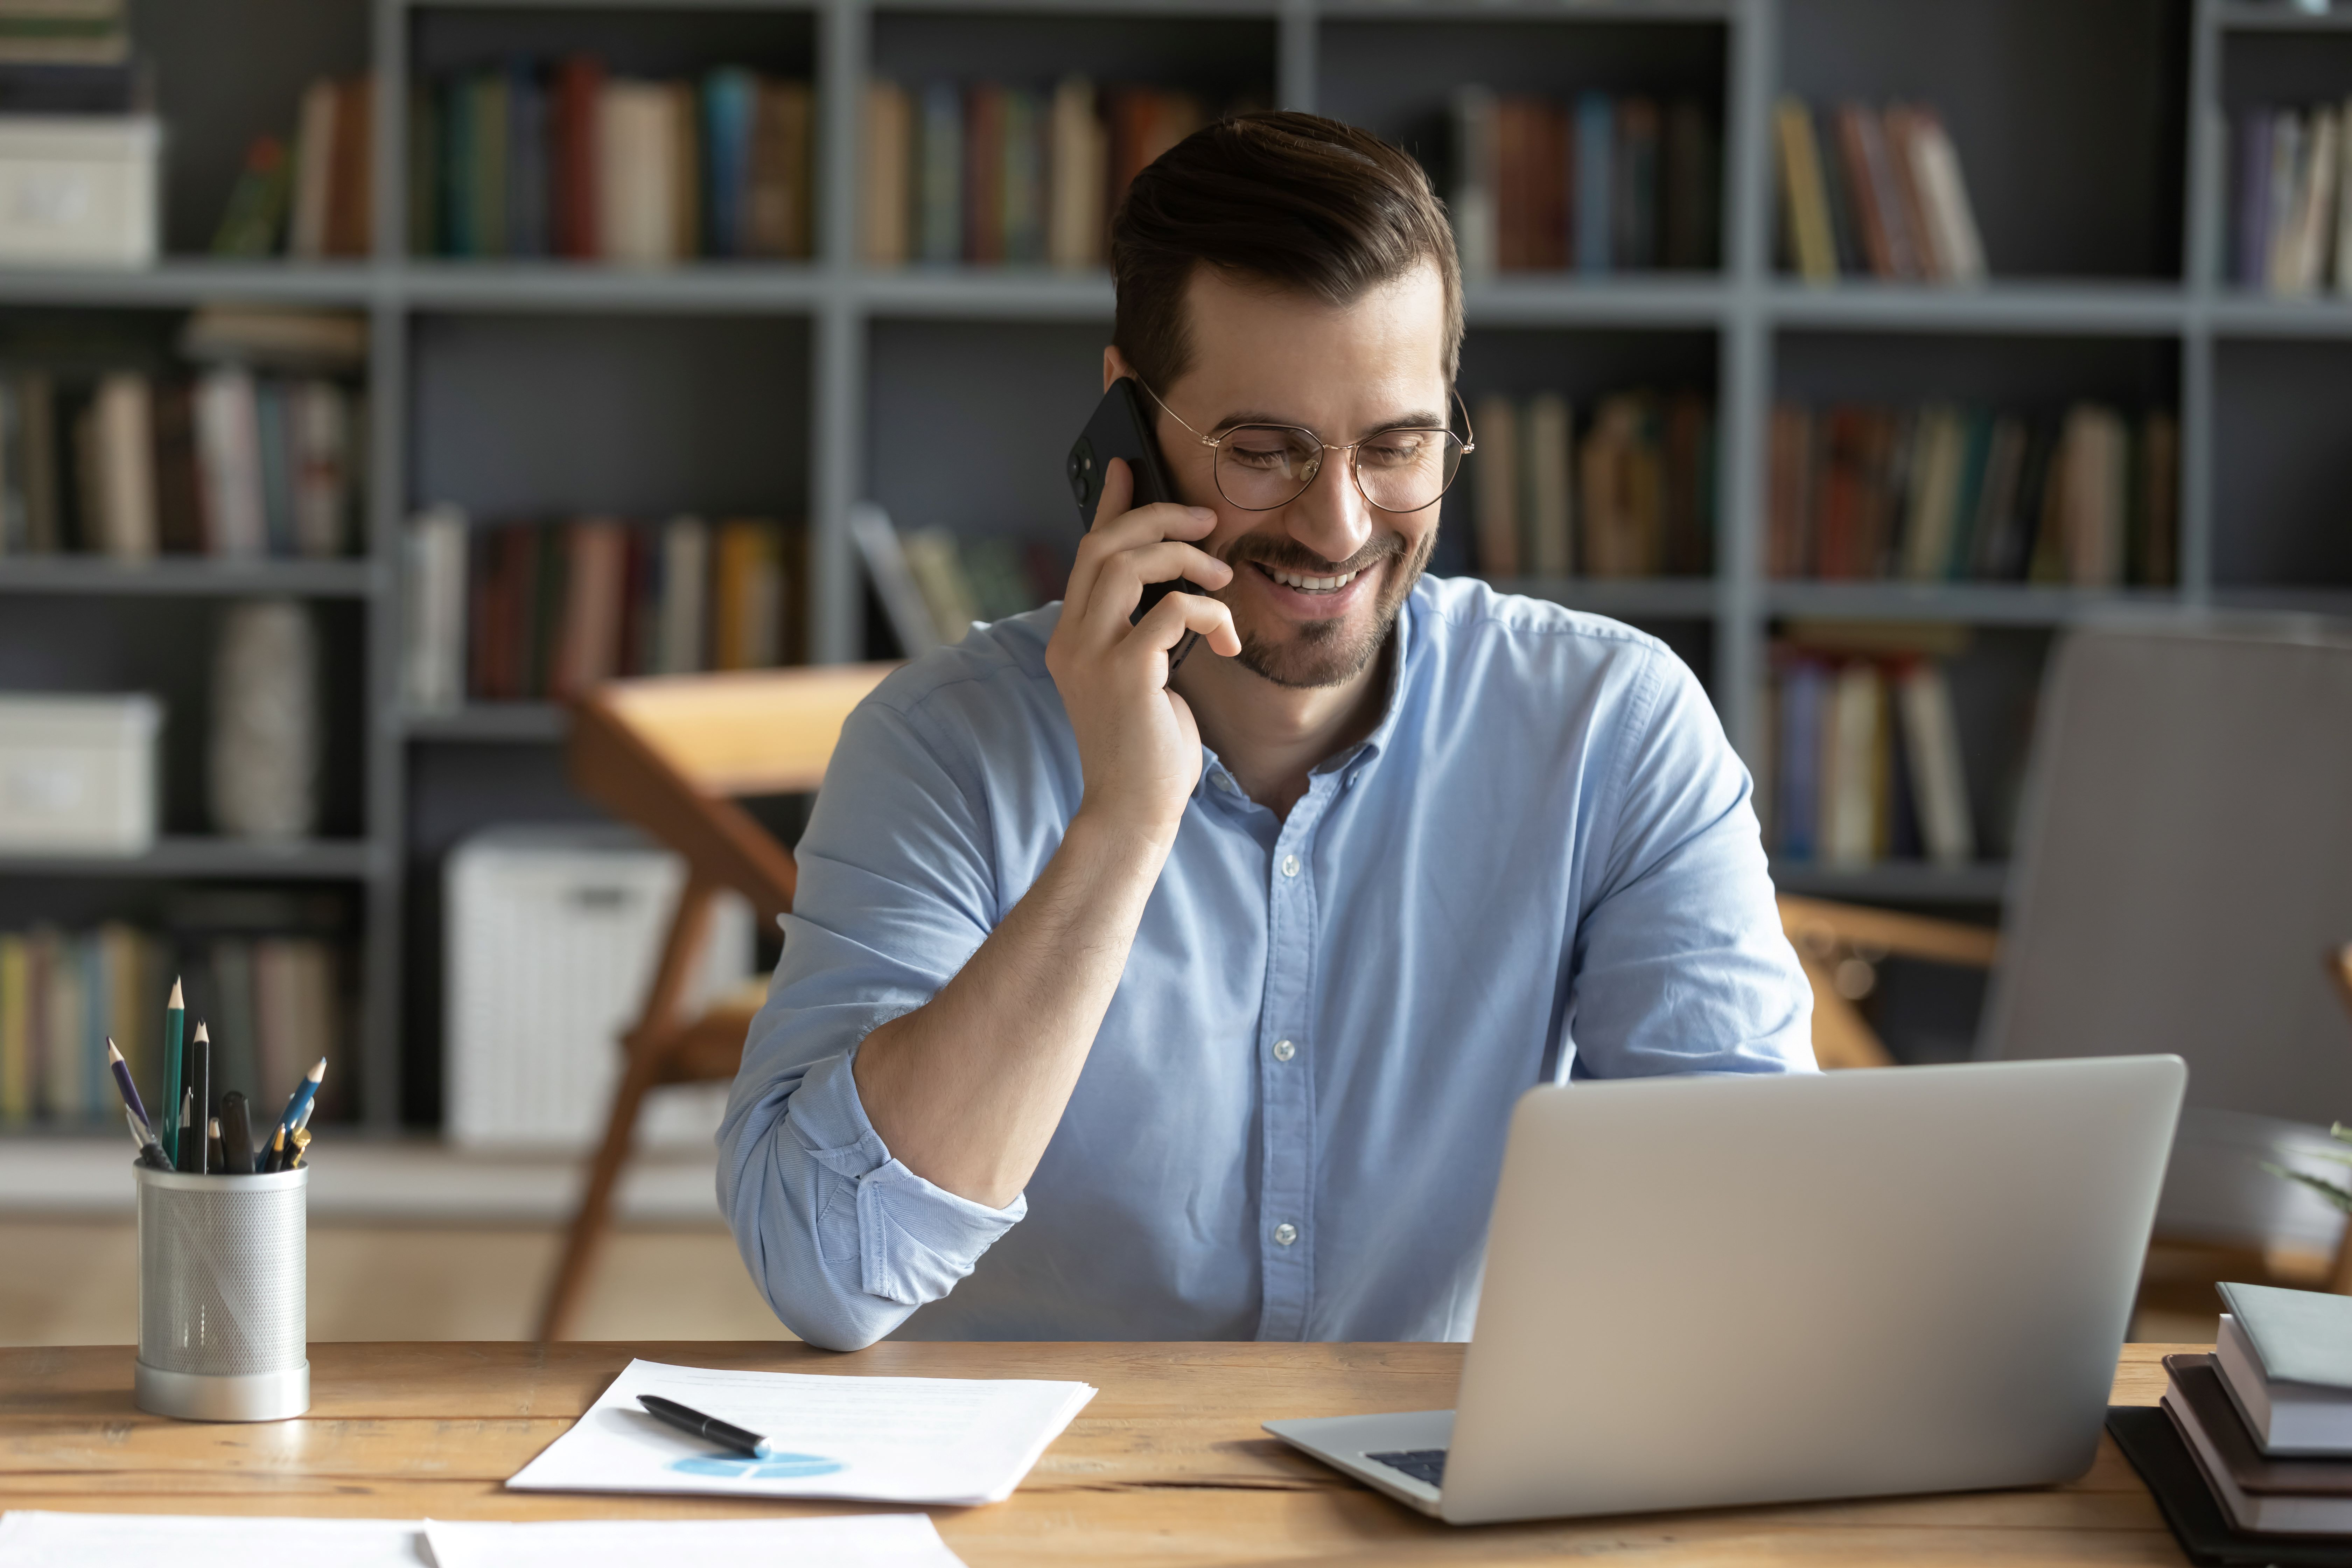 Telephone communication skills that help you attract customers